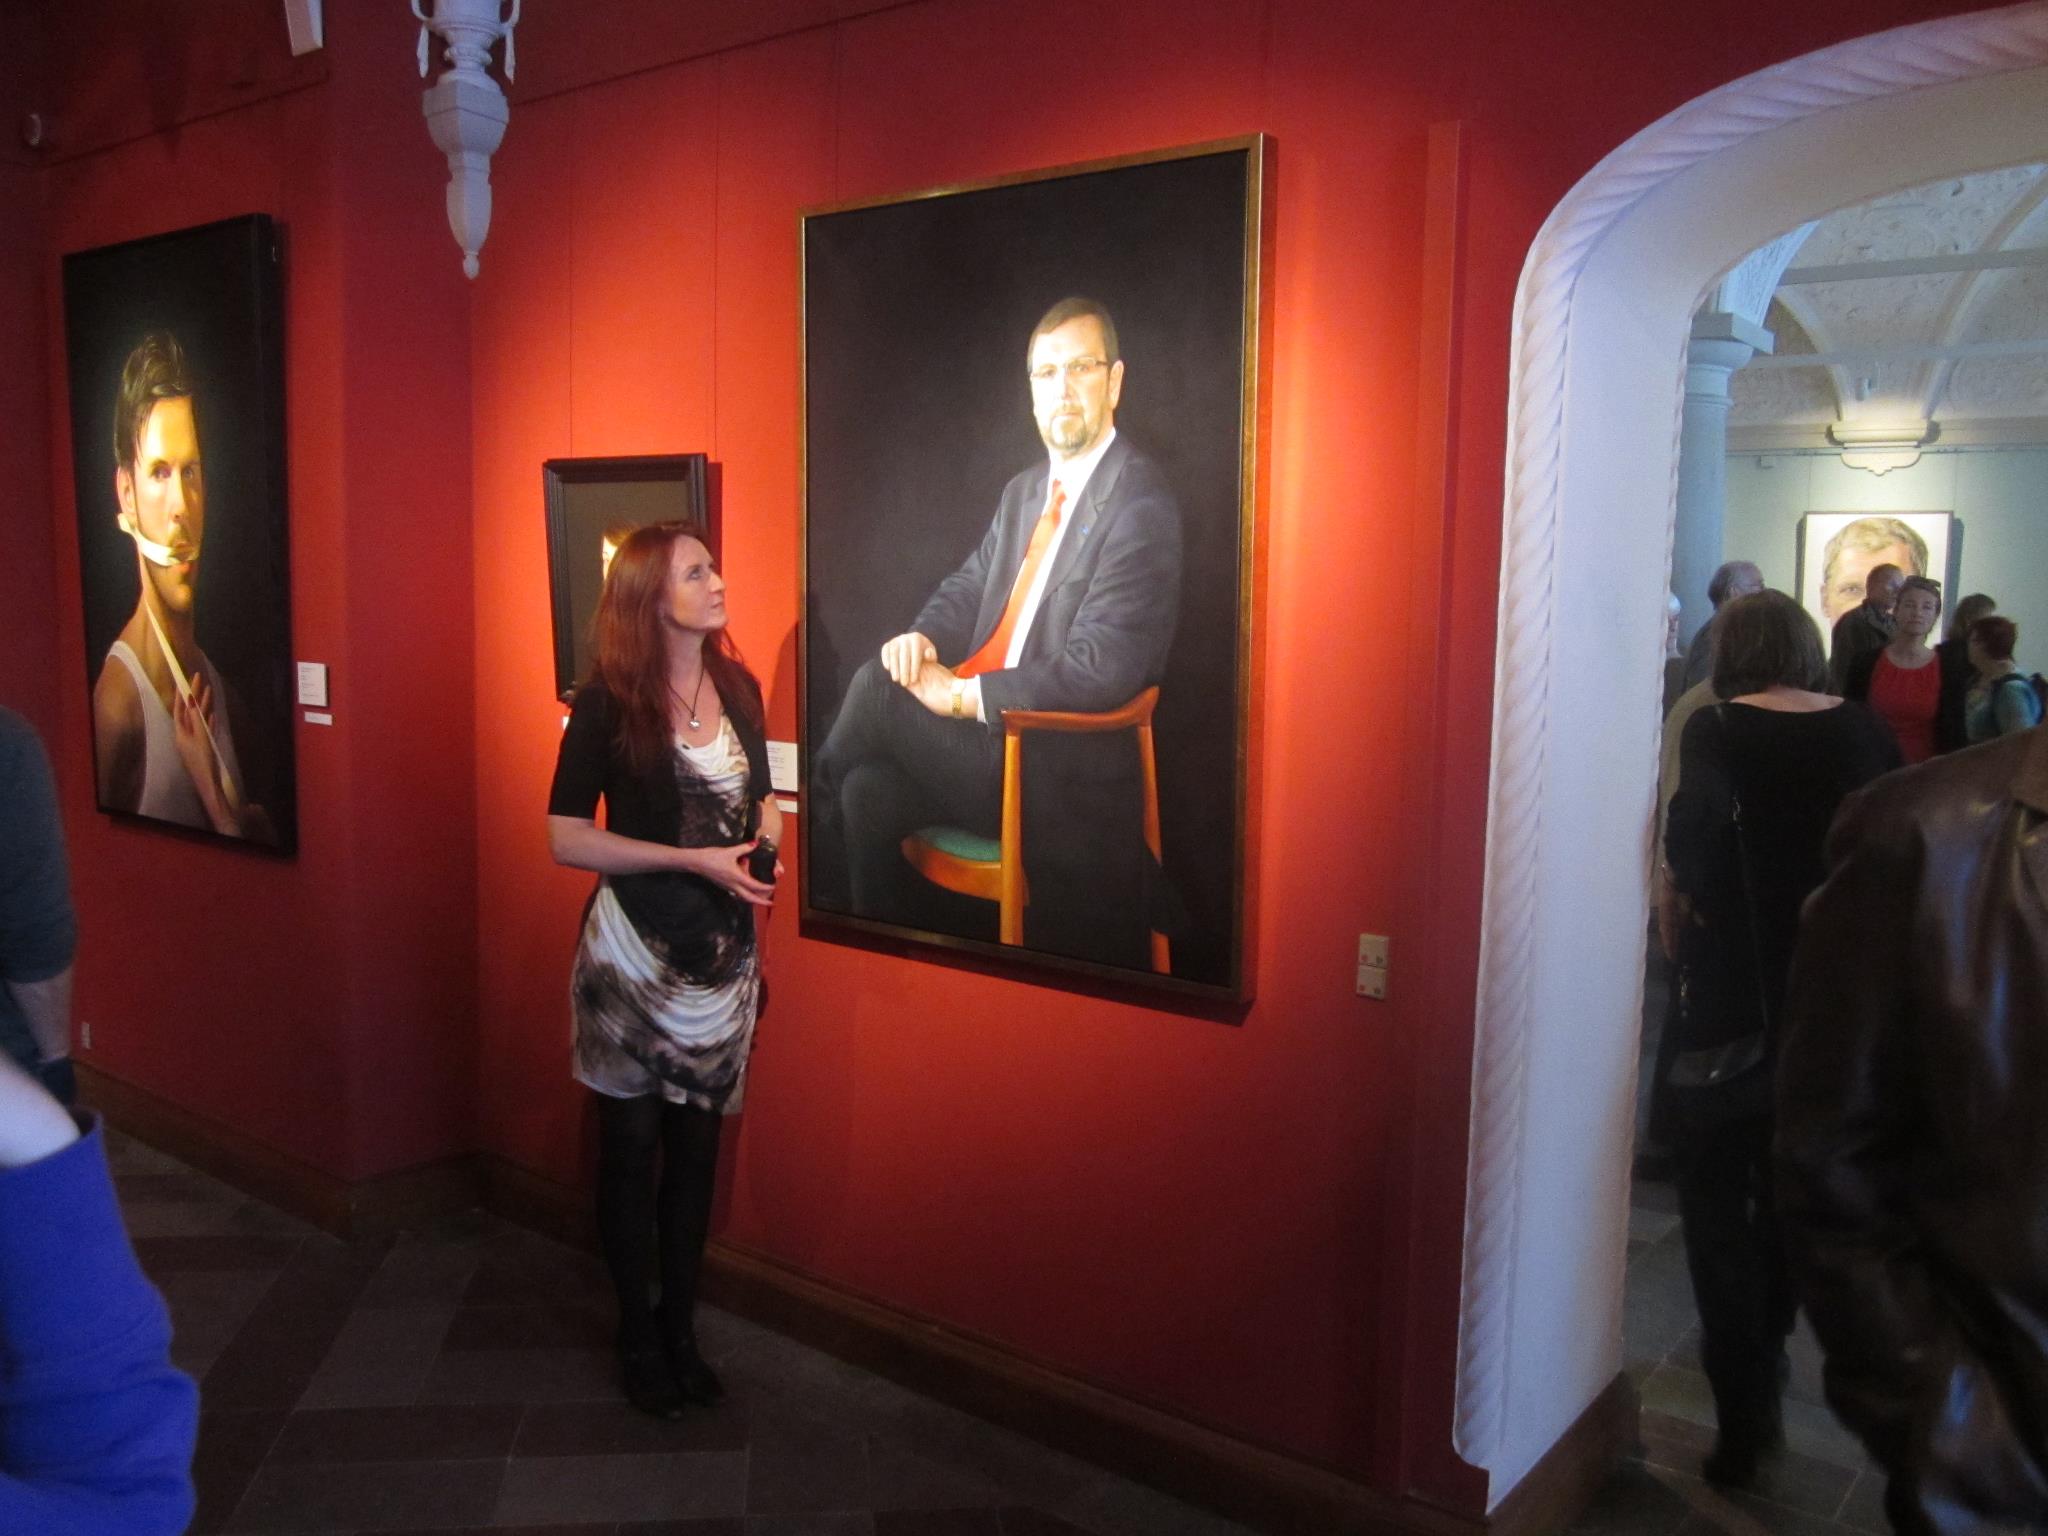 Ginny Page at Fredeiksborg Slot 2013 - PORTRAIT-NOW-2013 exhibition